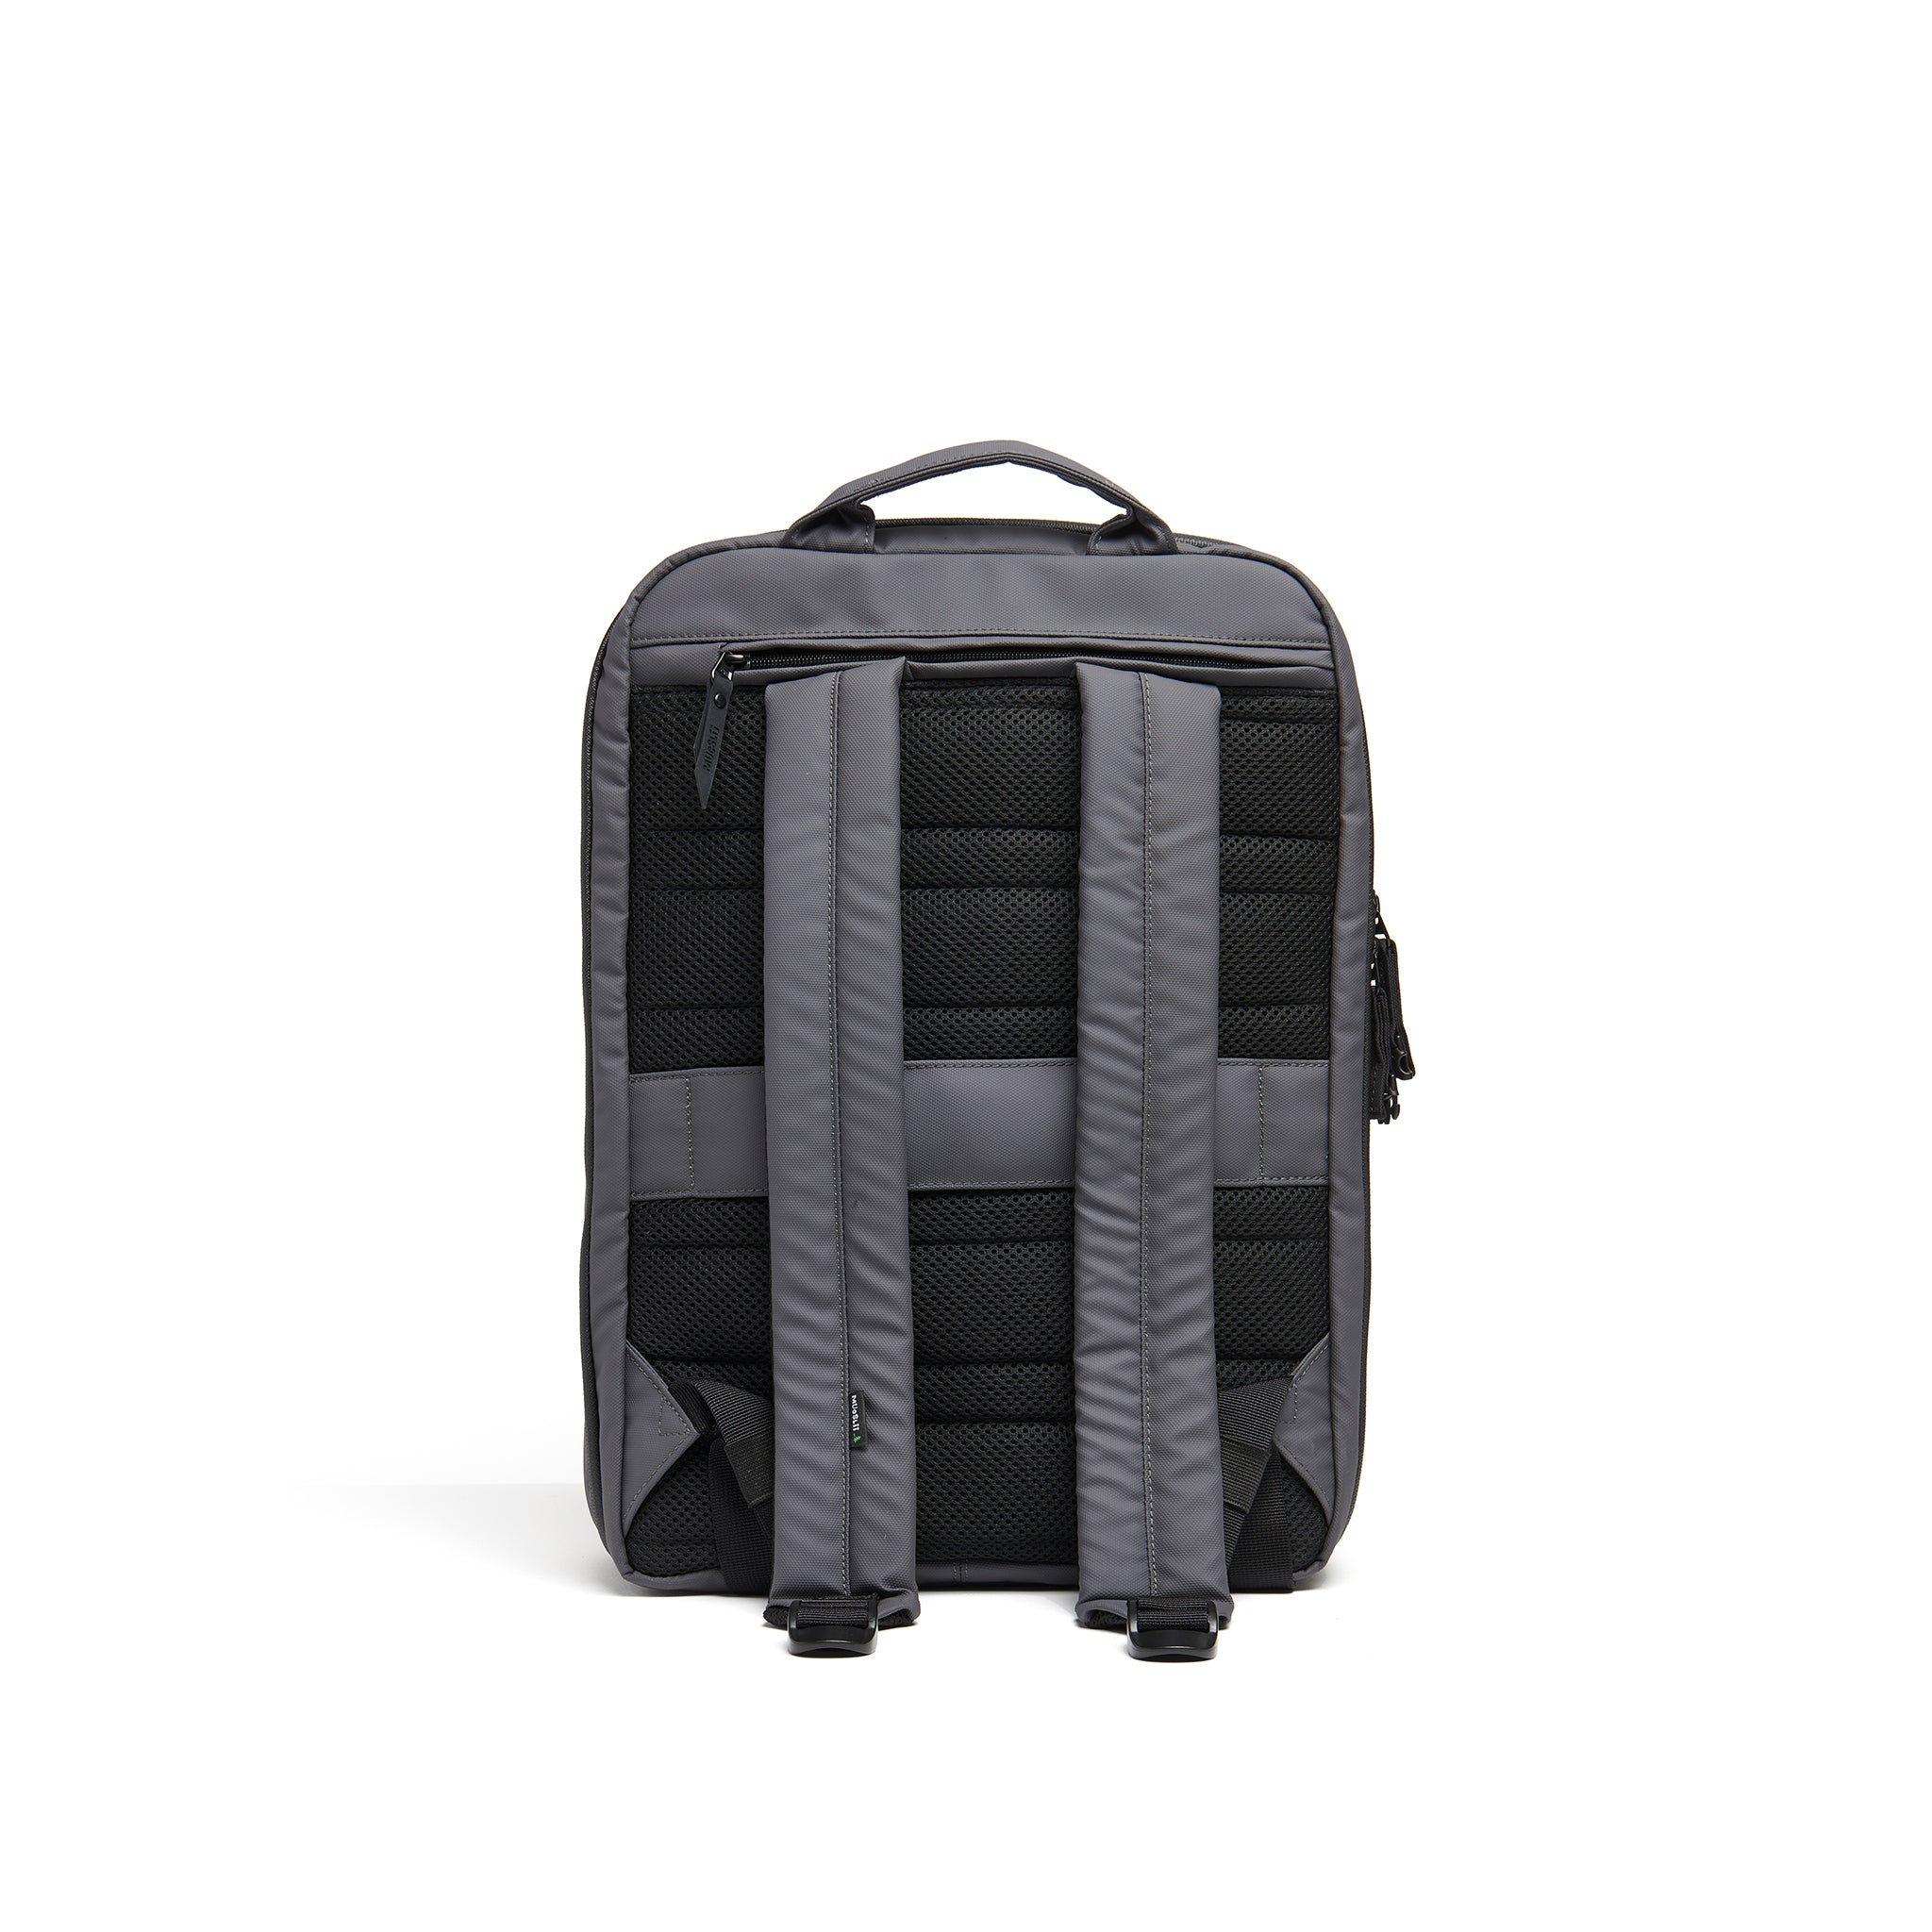 Mueslii travel backpack, made of PU coated waterproof nylon, with a laptop compartment, color grey, back view.